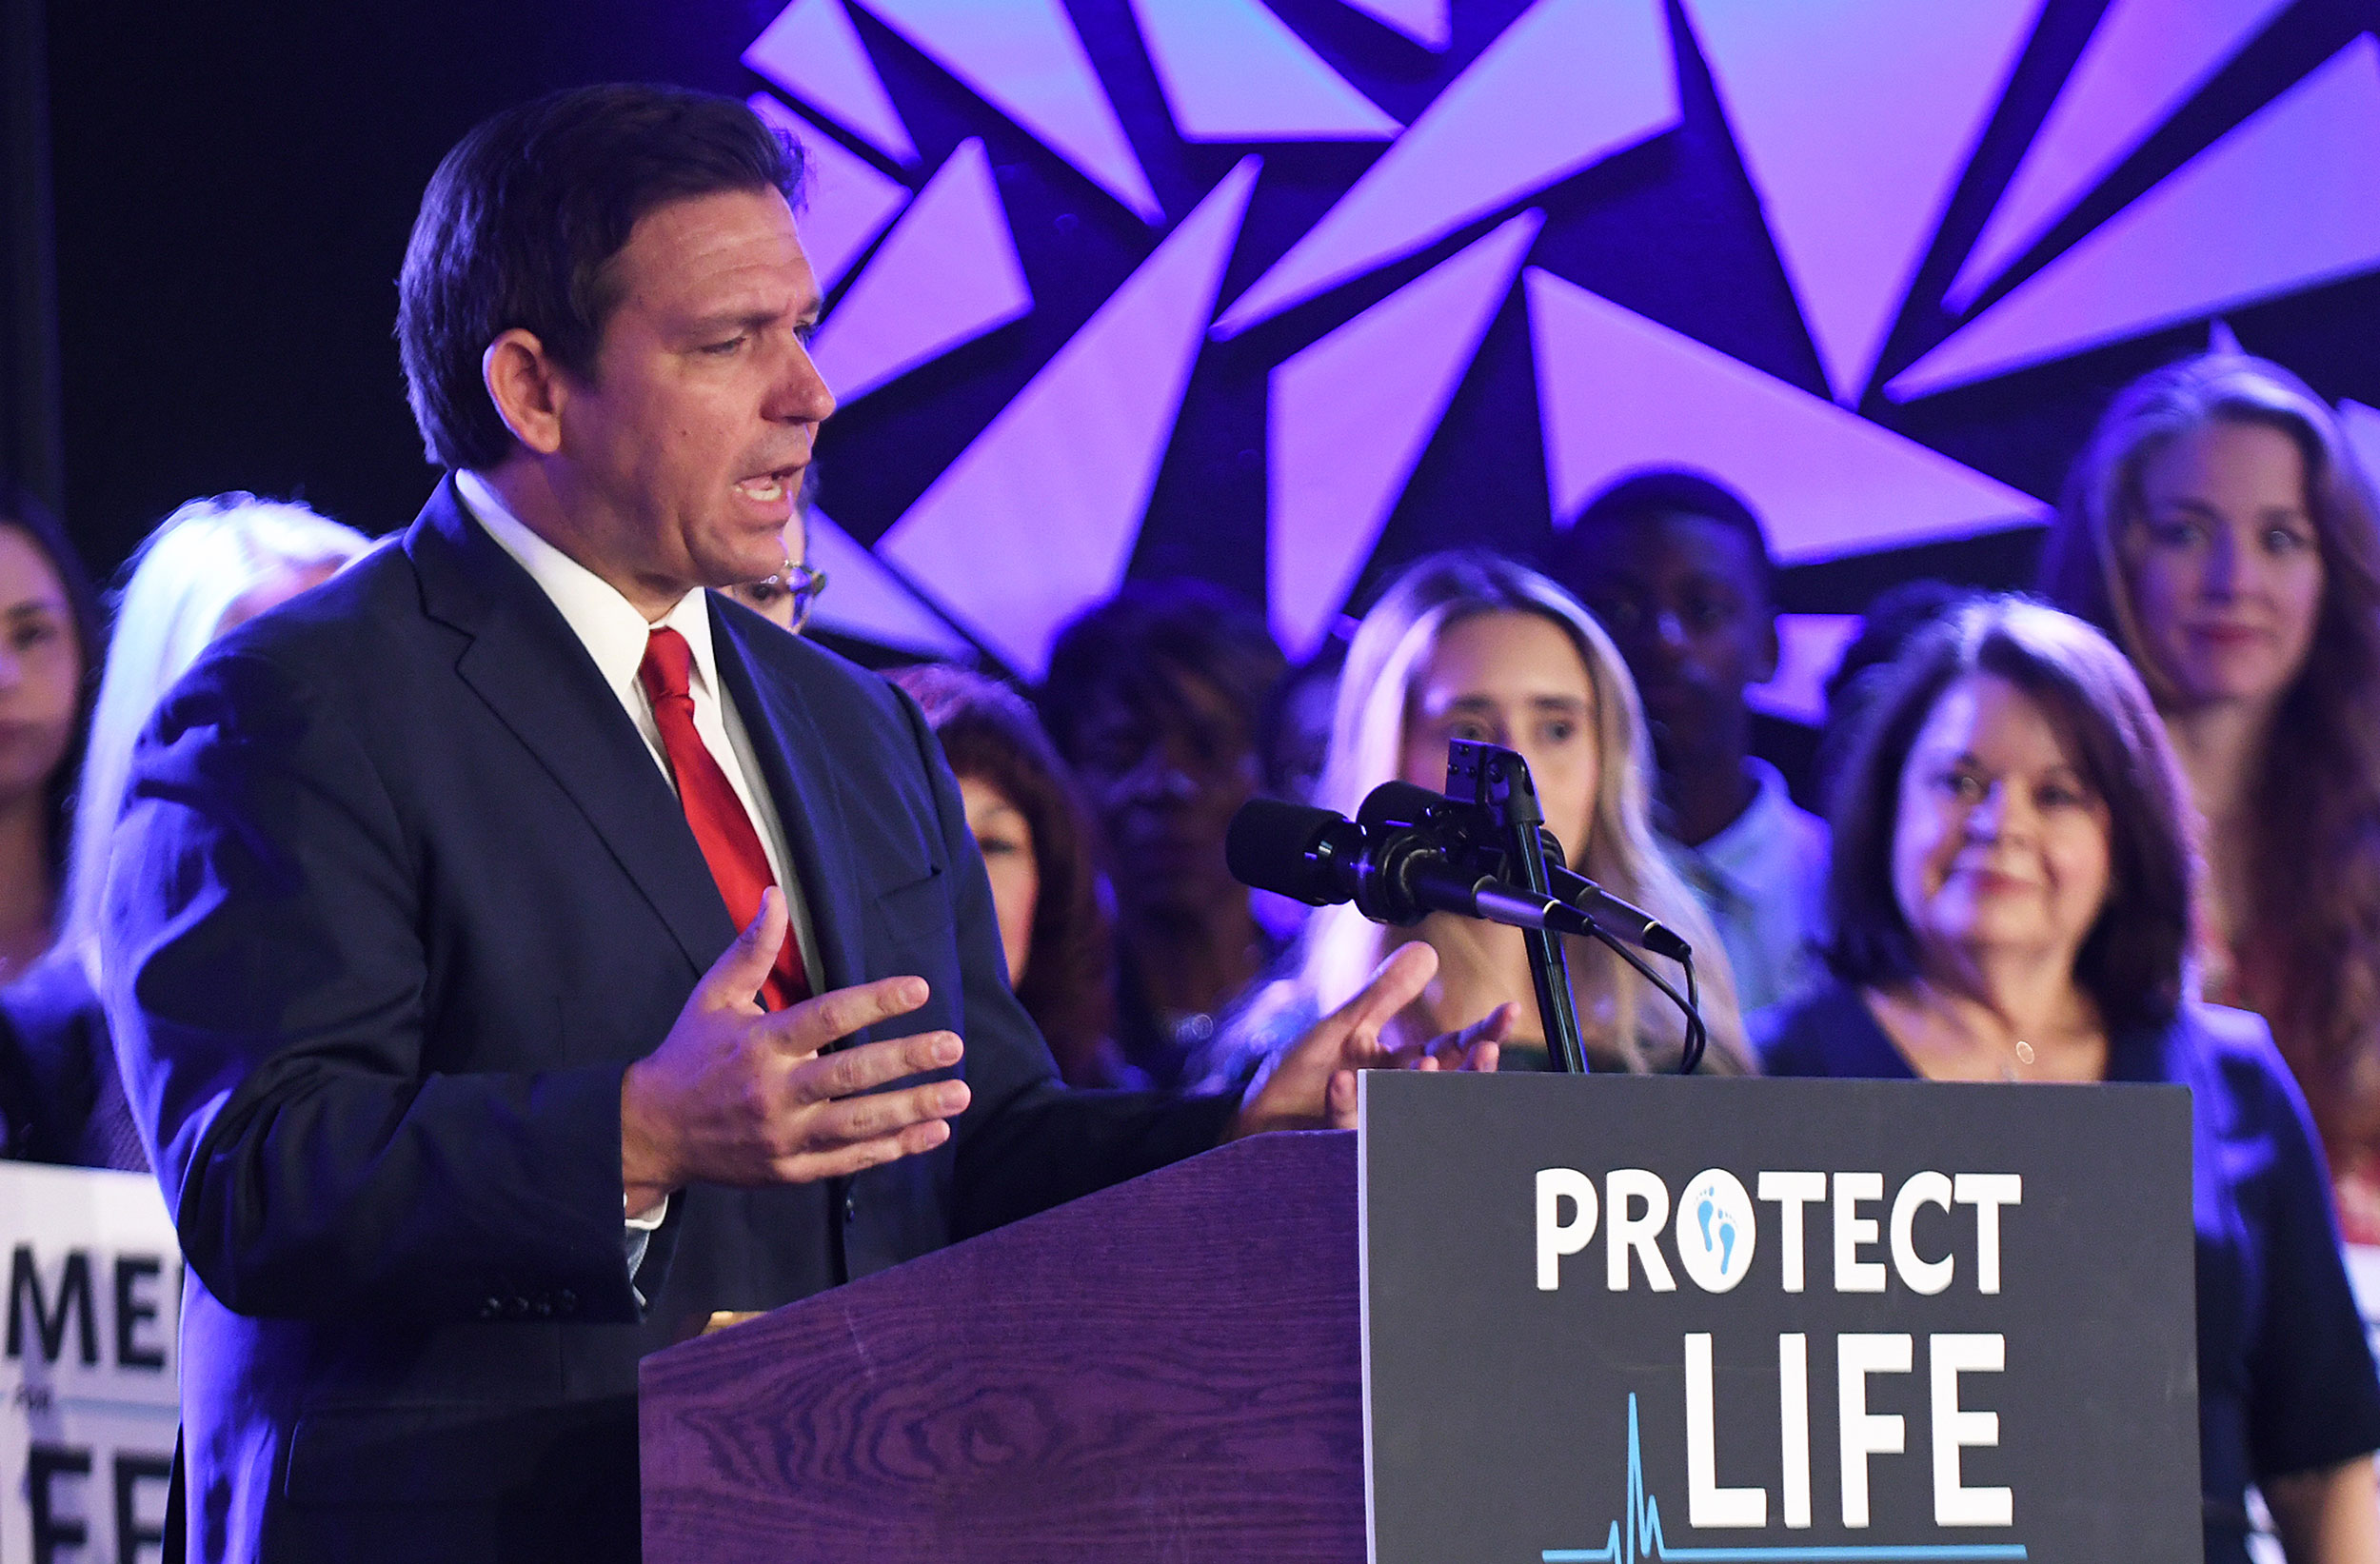 The 15-Week Abortion Ban In Florida Remains In Effect Despite Judge's Orders